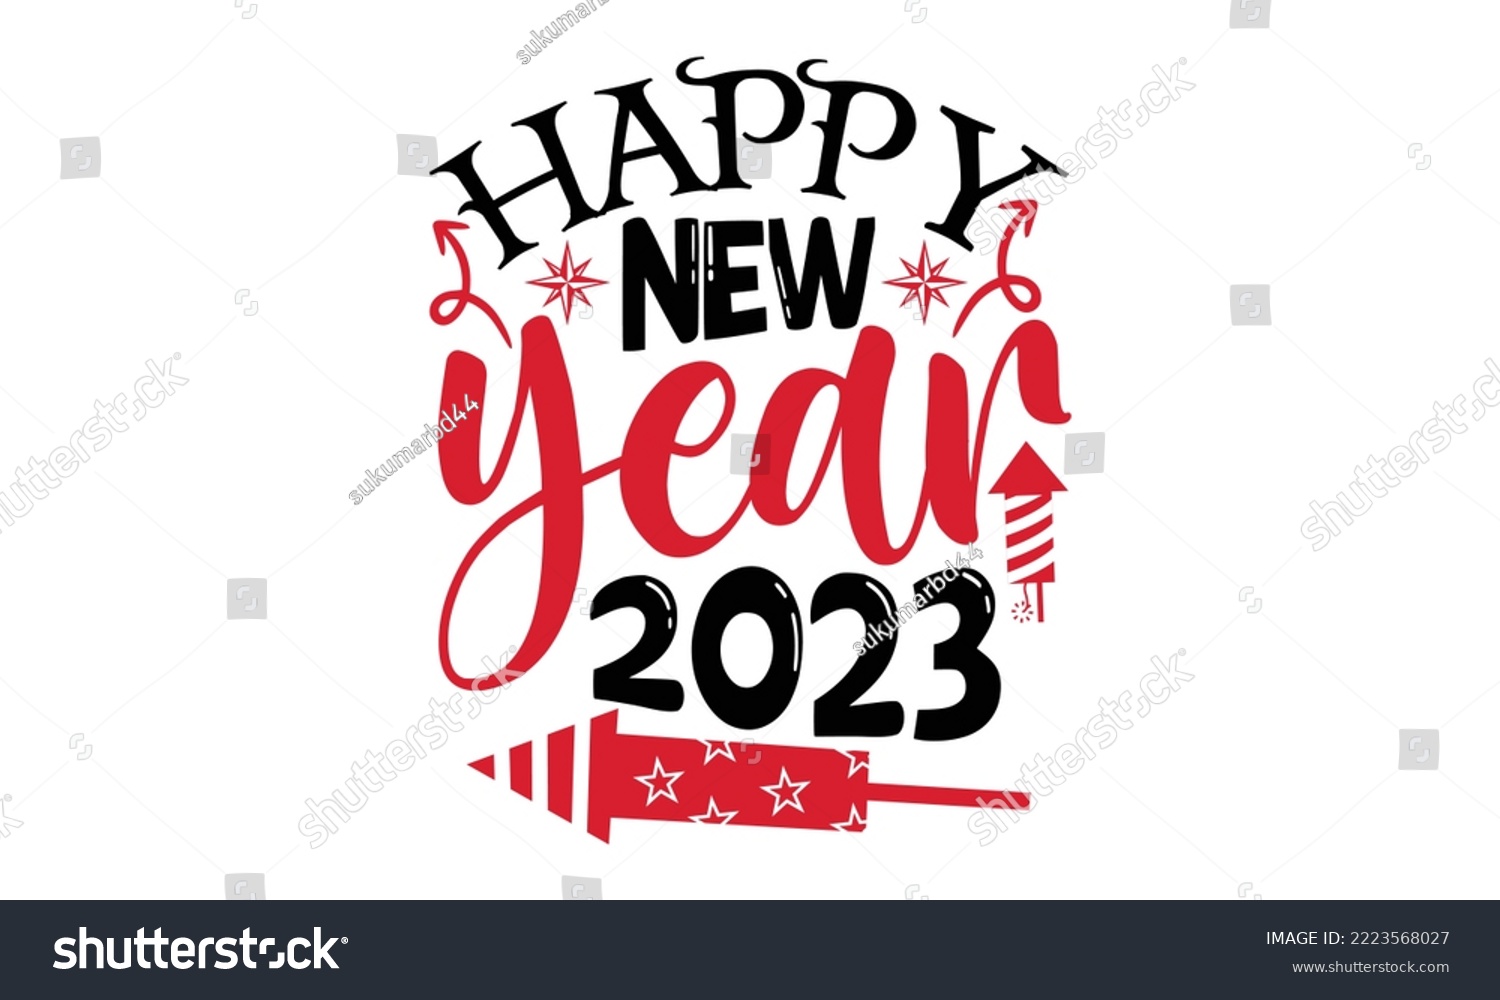 SVG of Happy New Year 2023 - Happy New Year SVG Design, Handmade calligraphy vector illustration, Illustration for prints on t-shirt and bags, posters svg